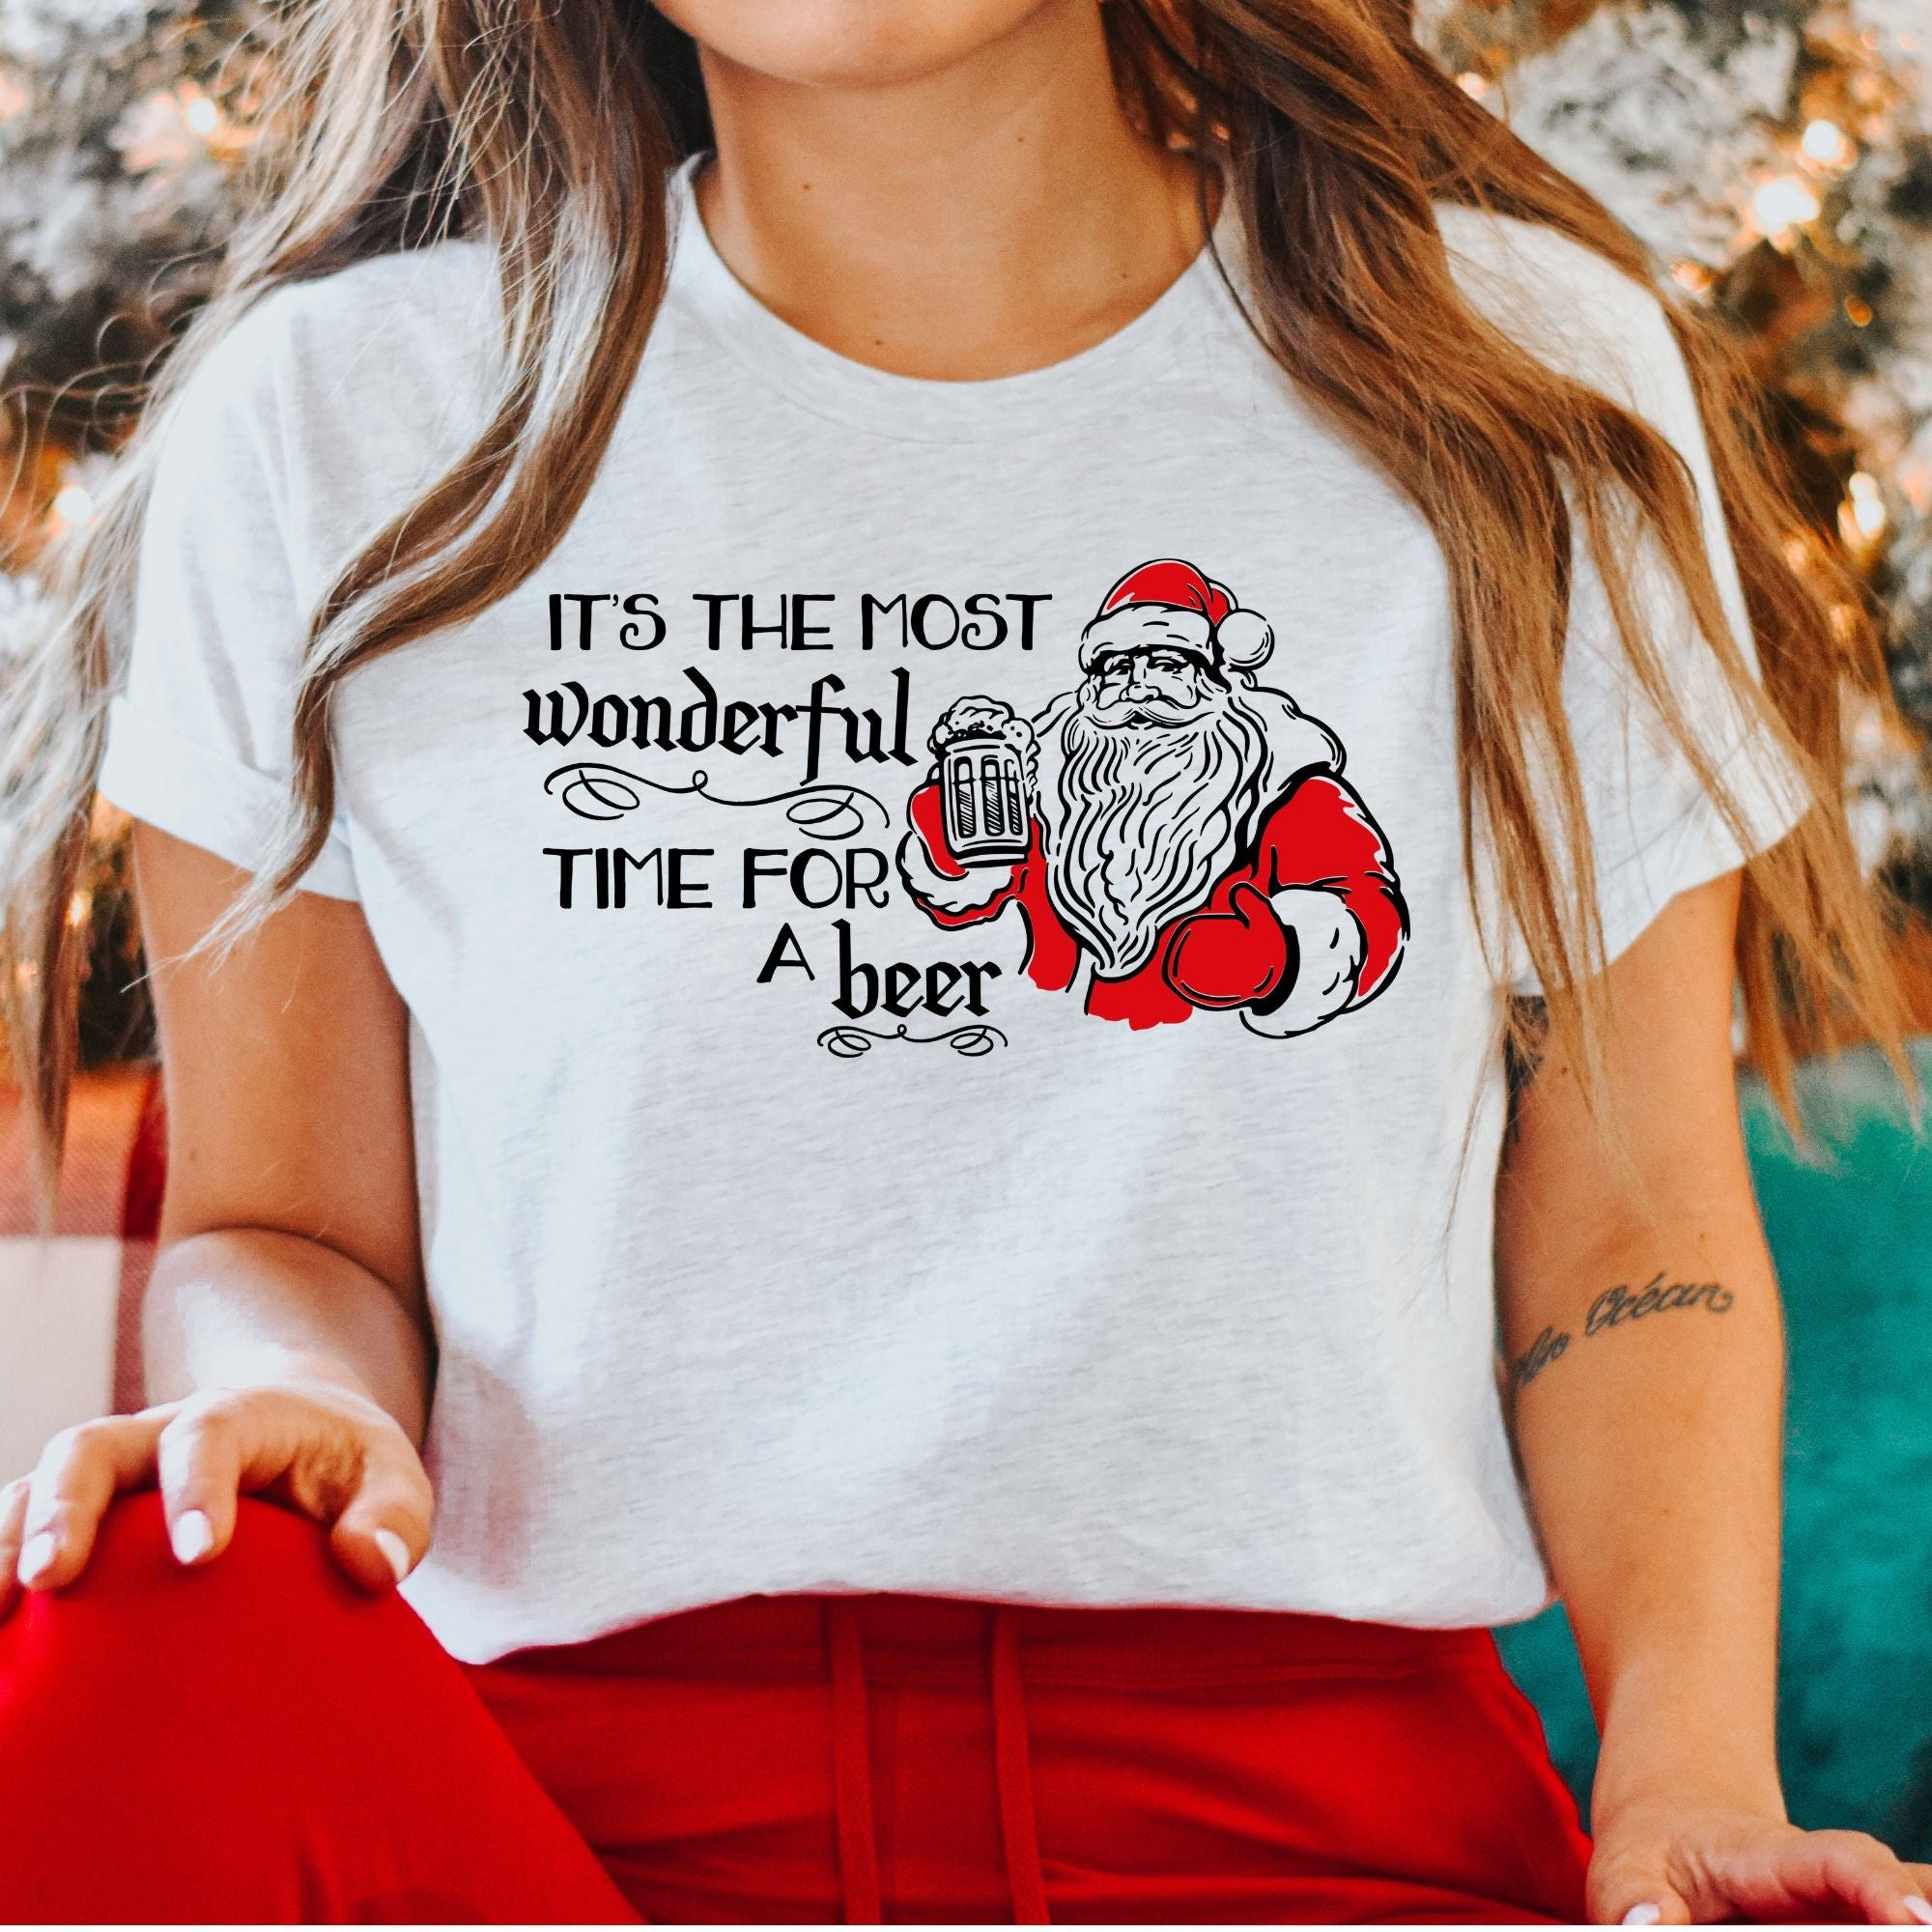 Wonderful Time for a Beer Santa Shirt, Funny Holiday Graphic Tee *UNISEX FIT*-208 Tees Wholesale, Idaho